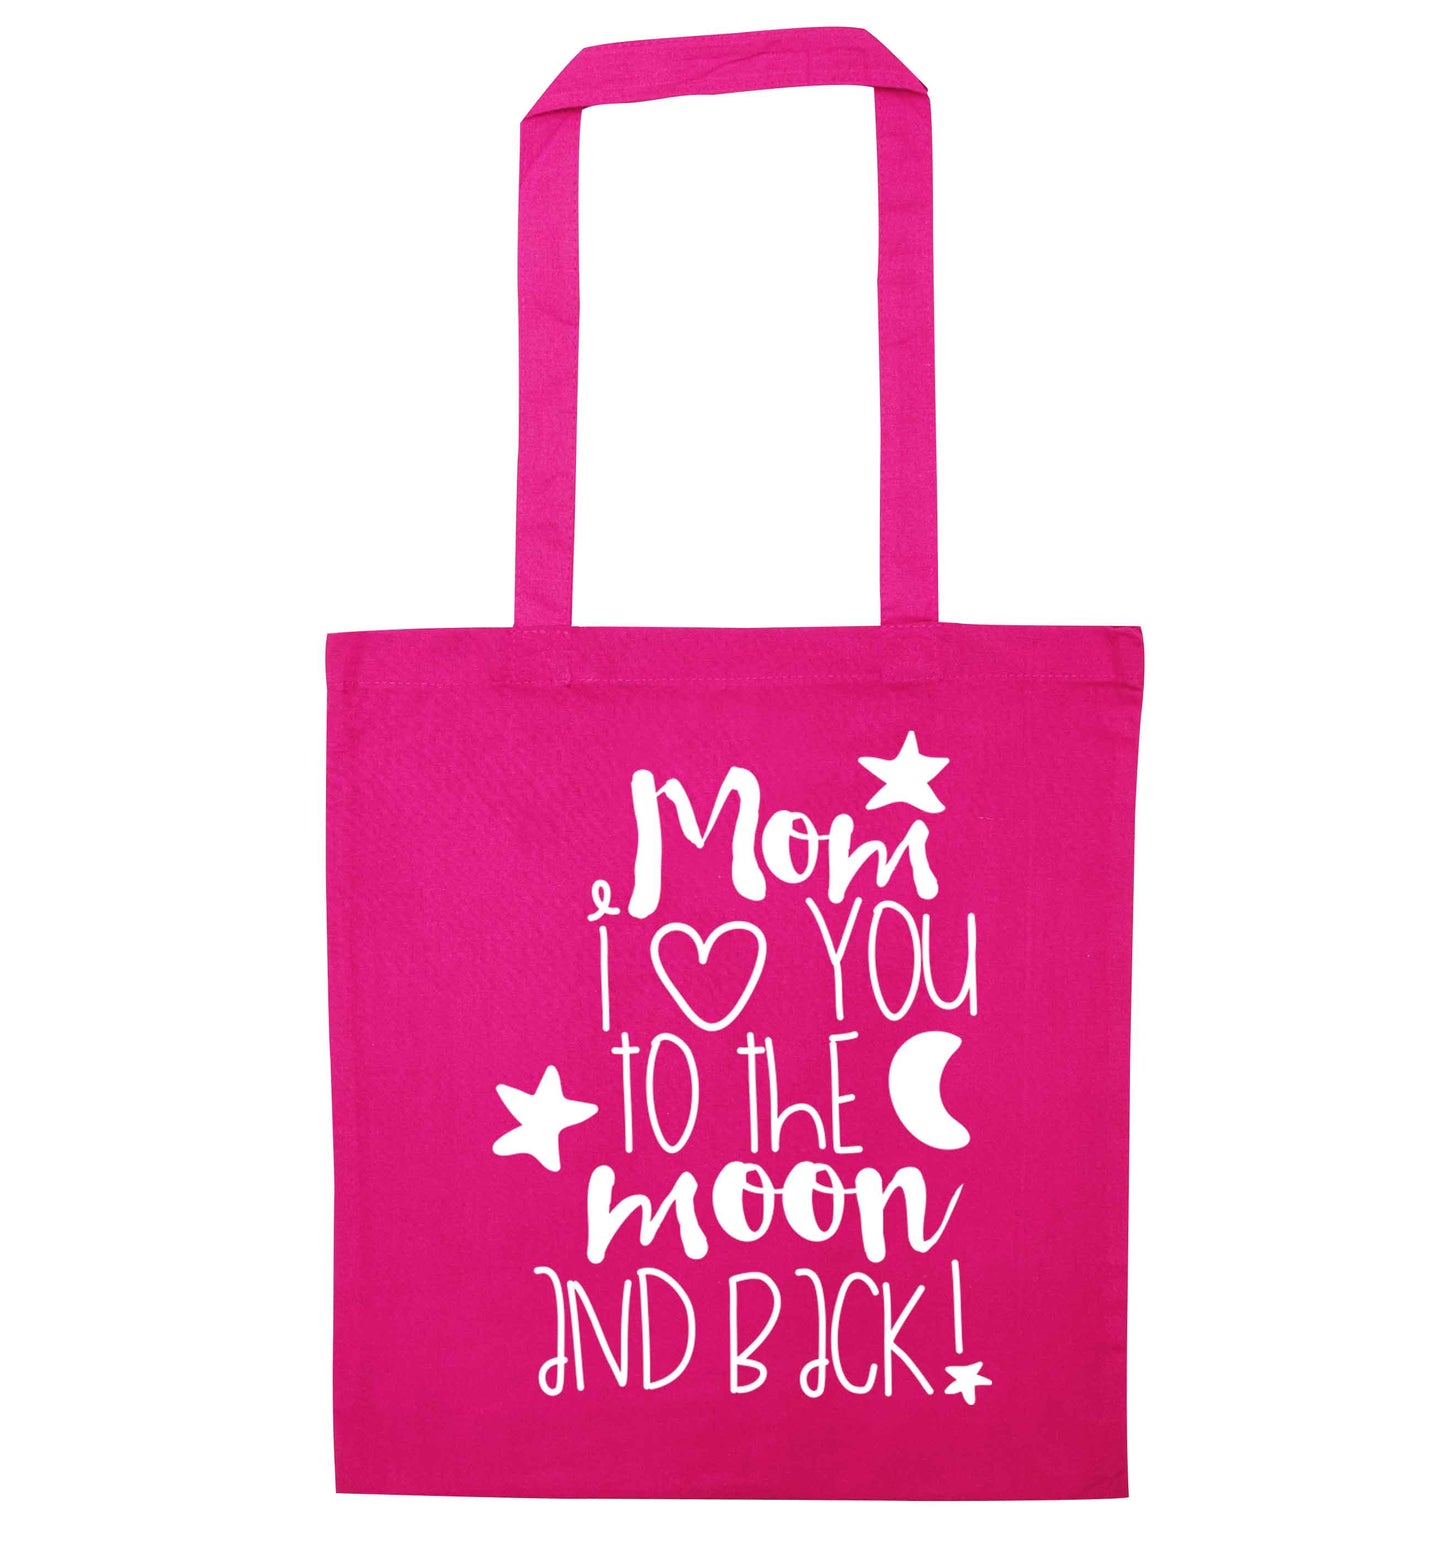 Mom I love you to the moon and back pink tote bag